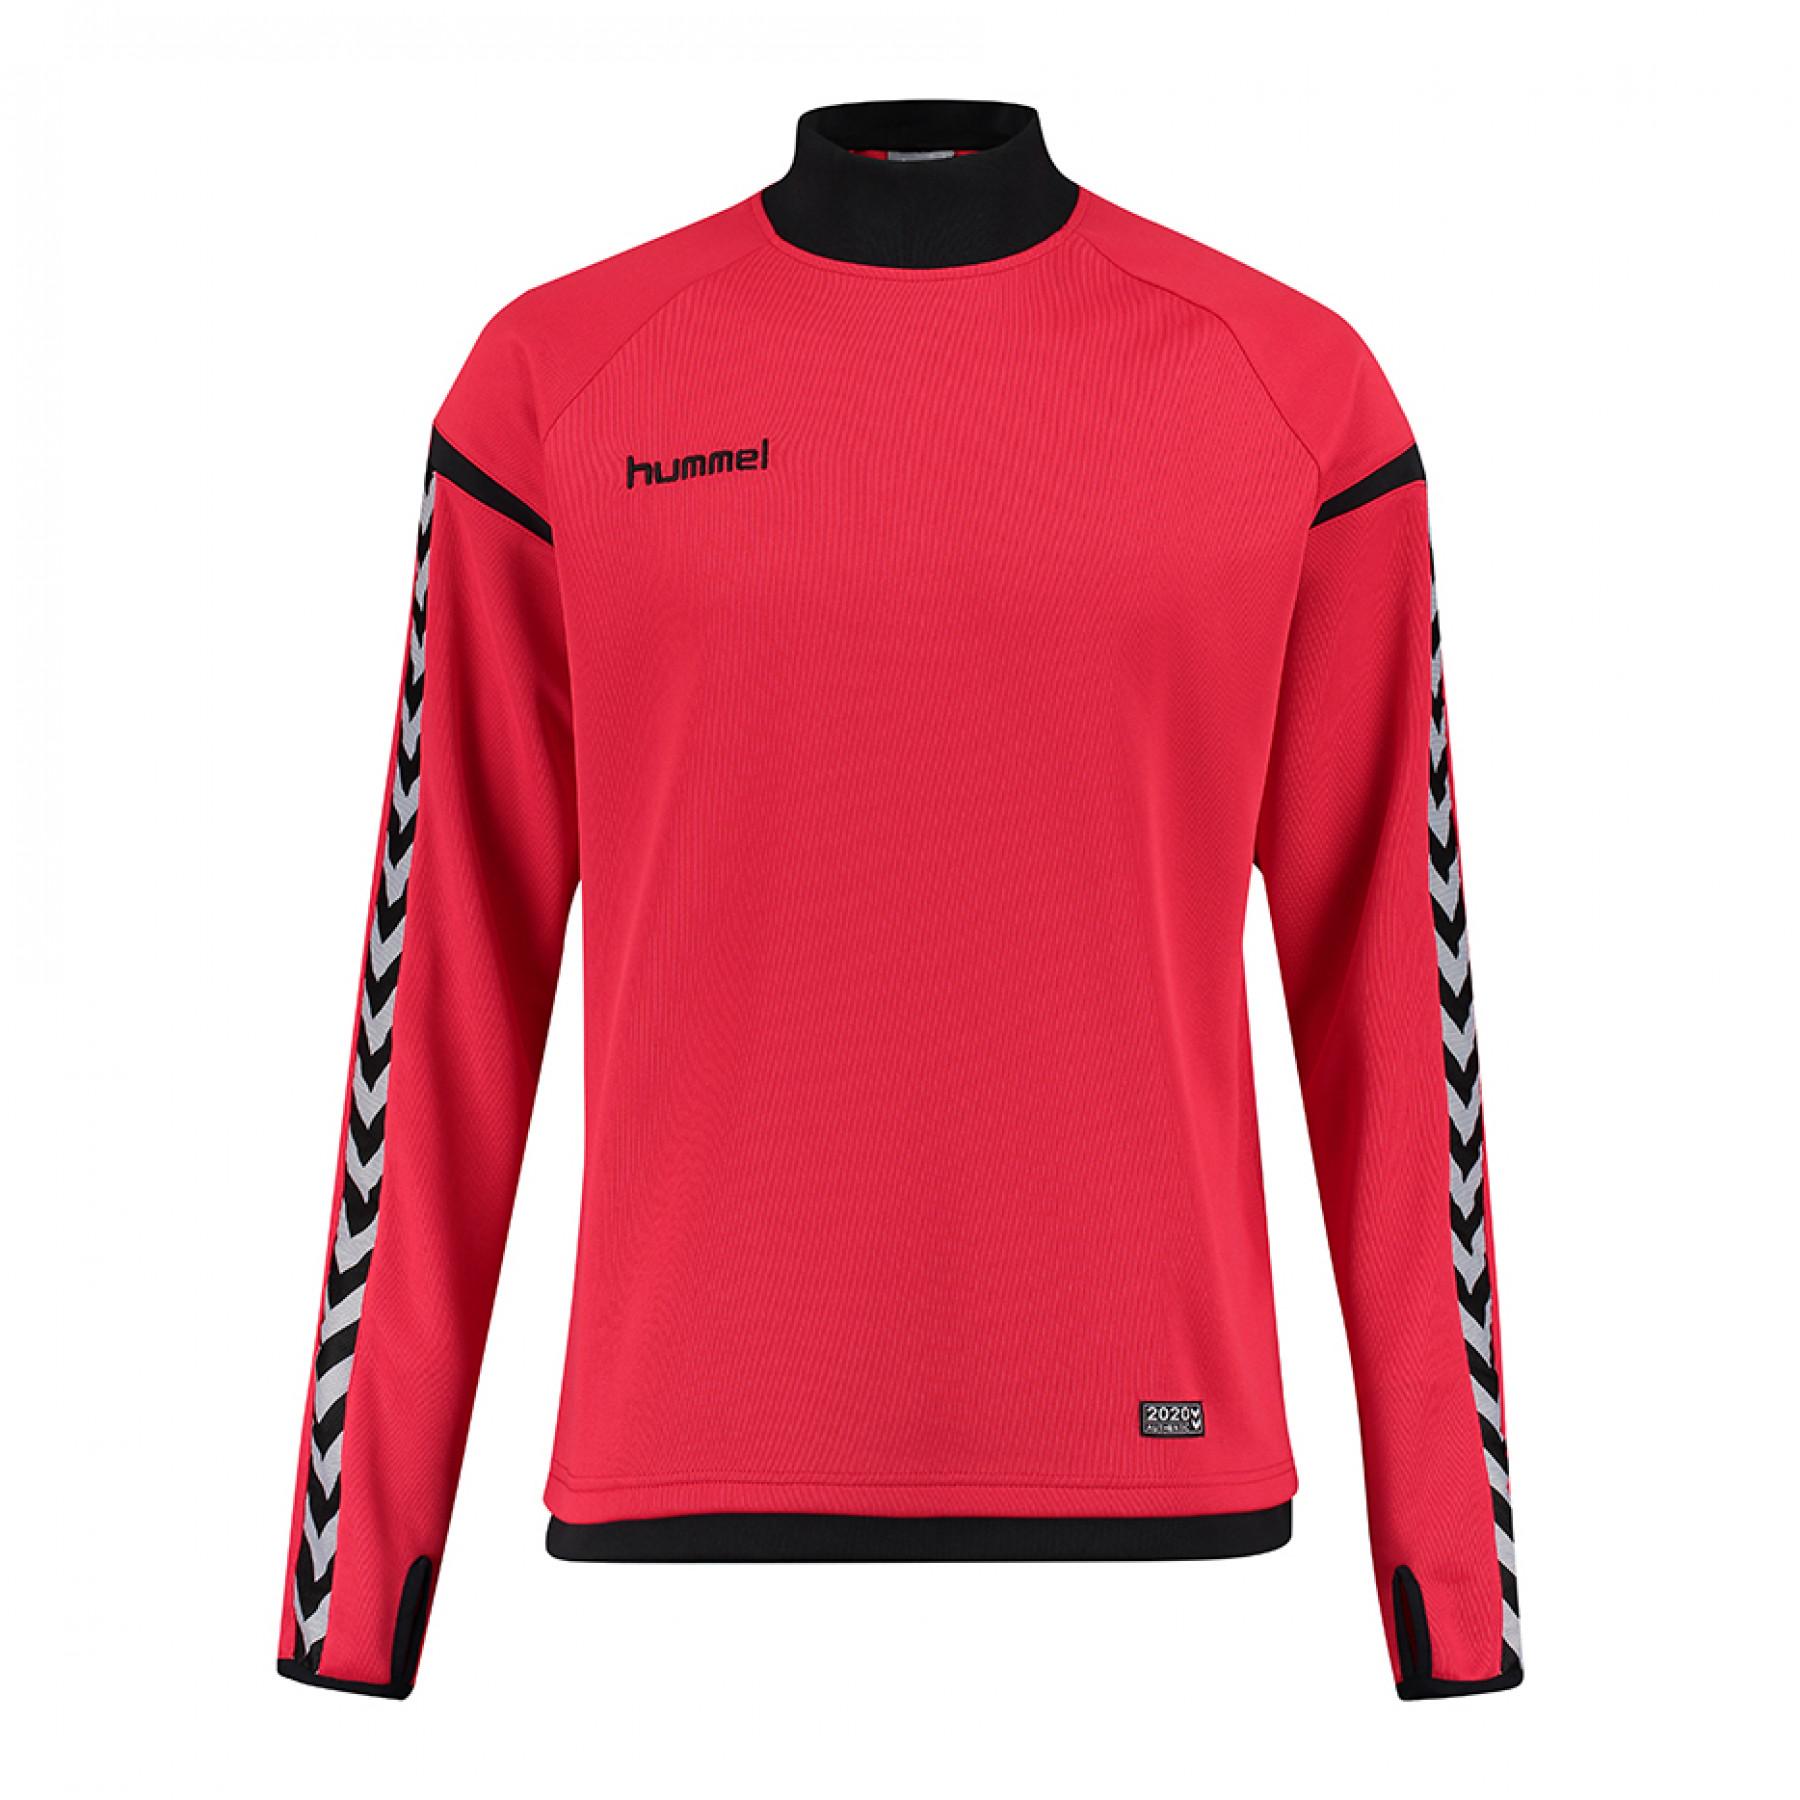 Jersey Hummel auth charge turtle neck